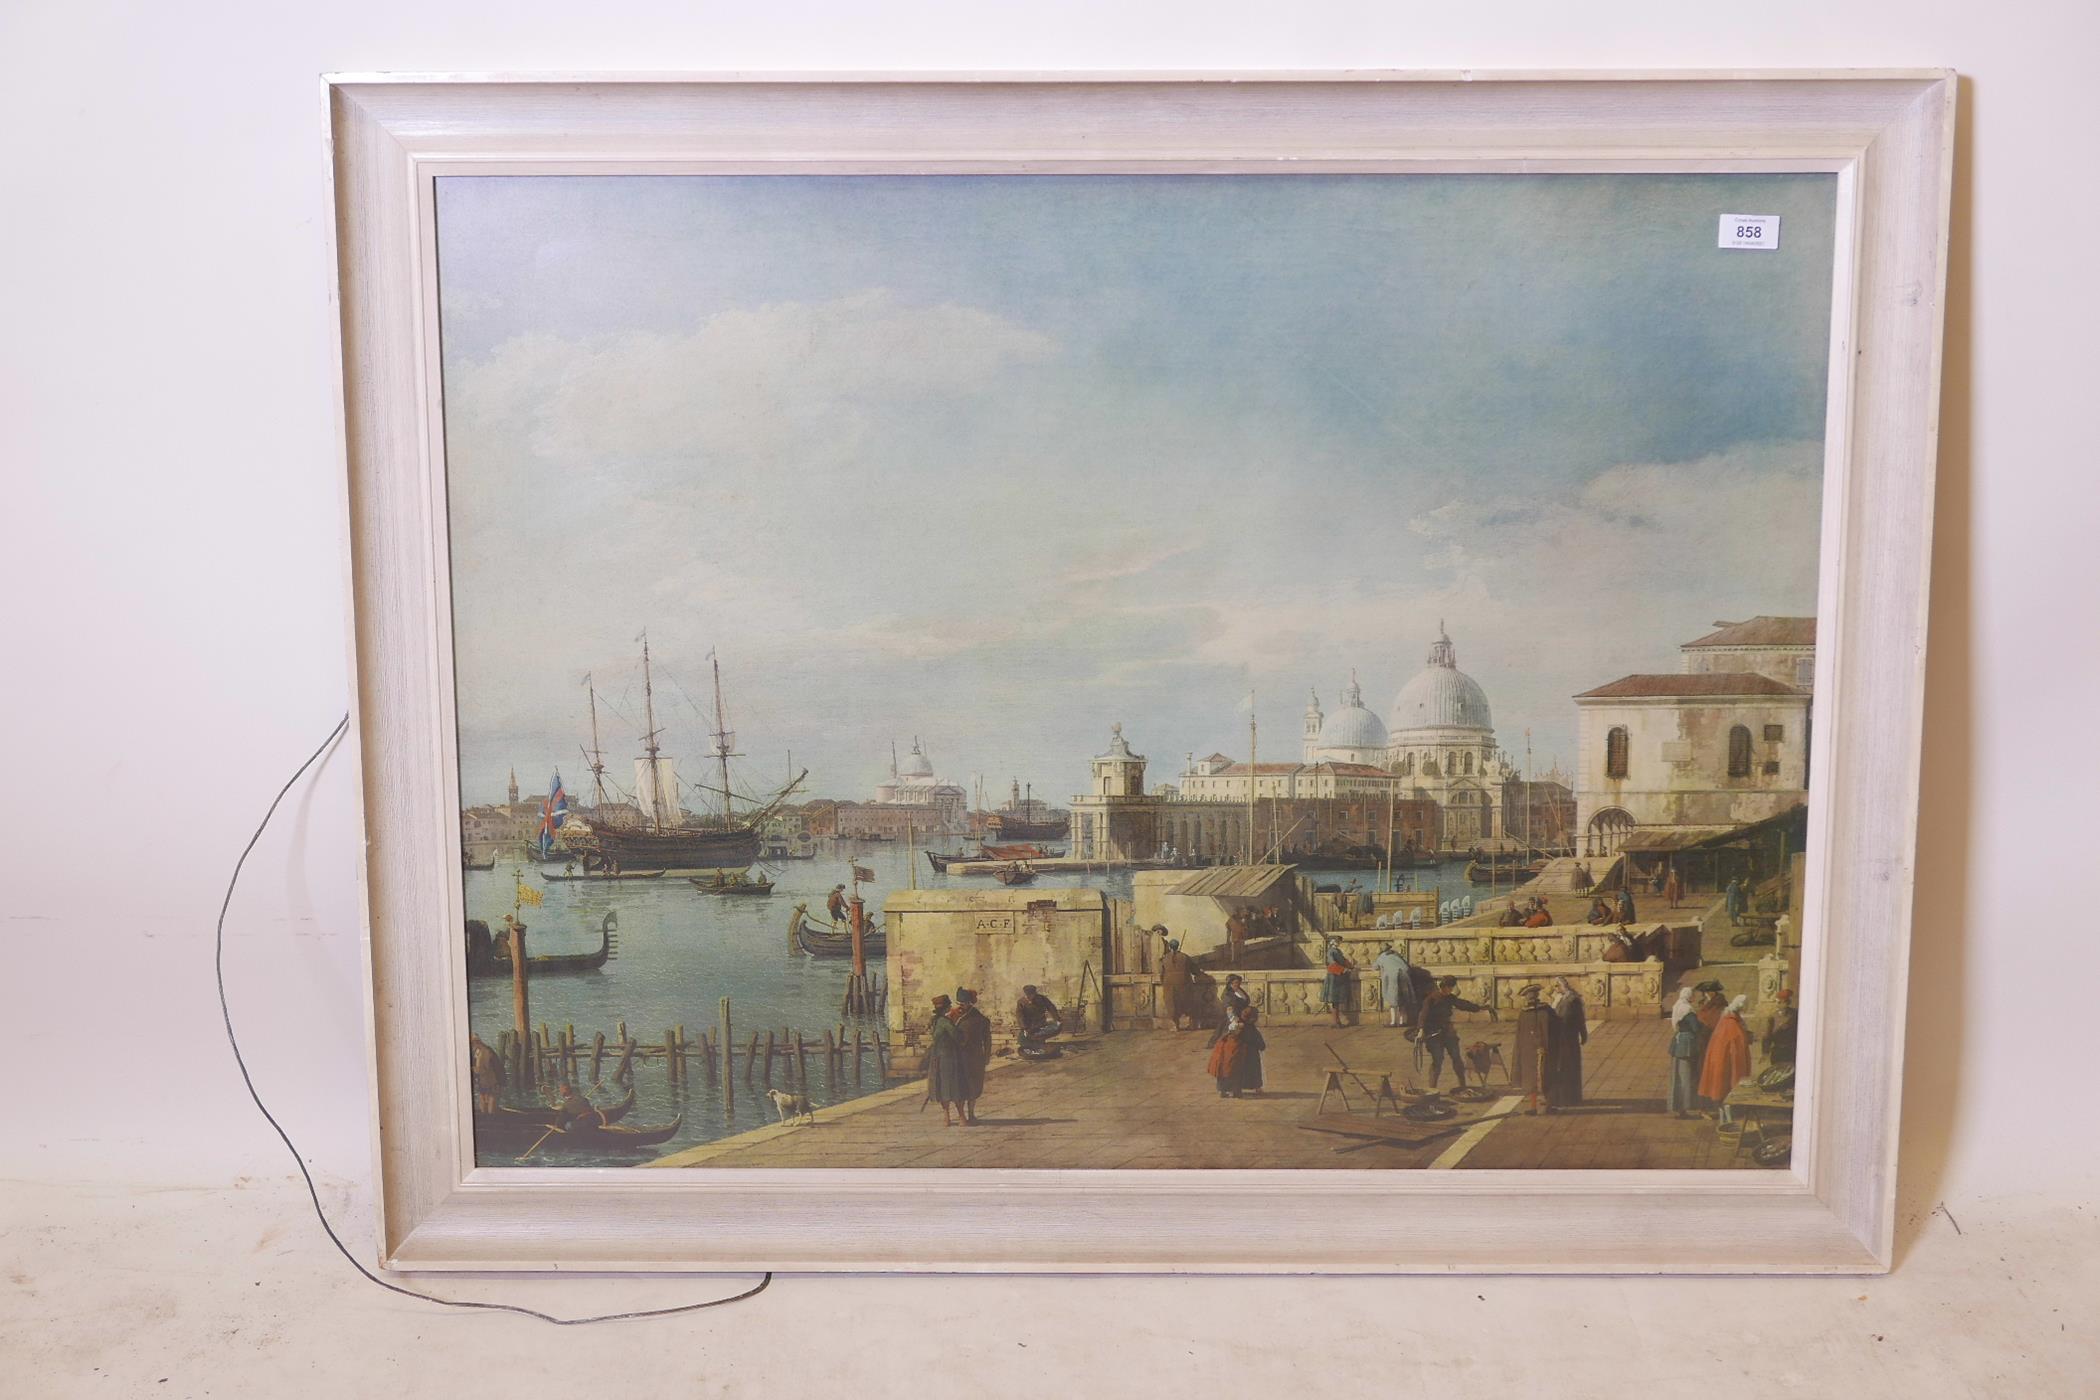 After Canaletto, The Quay of the Piazzetta, colour print, 36" x 27" - Image 2 of 2